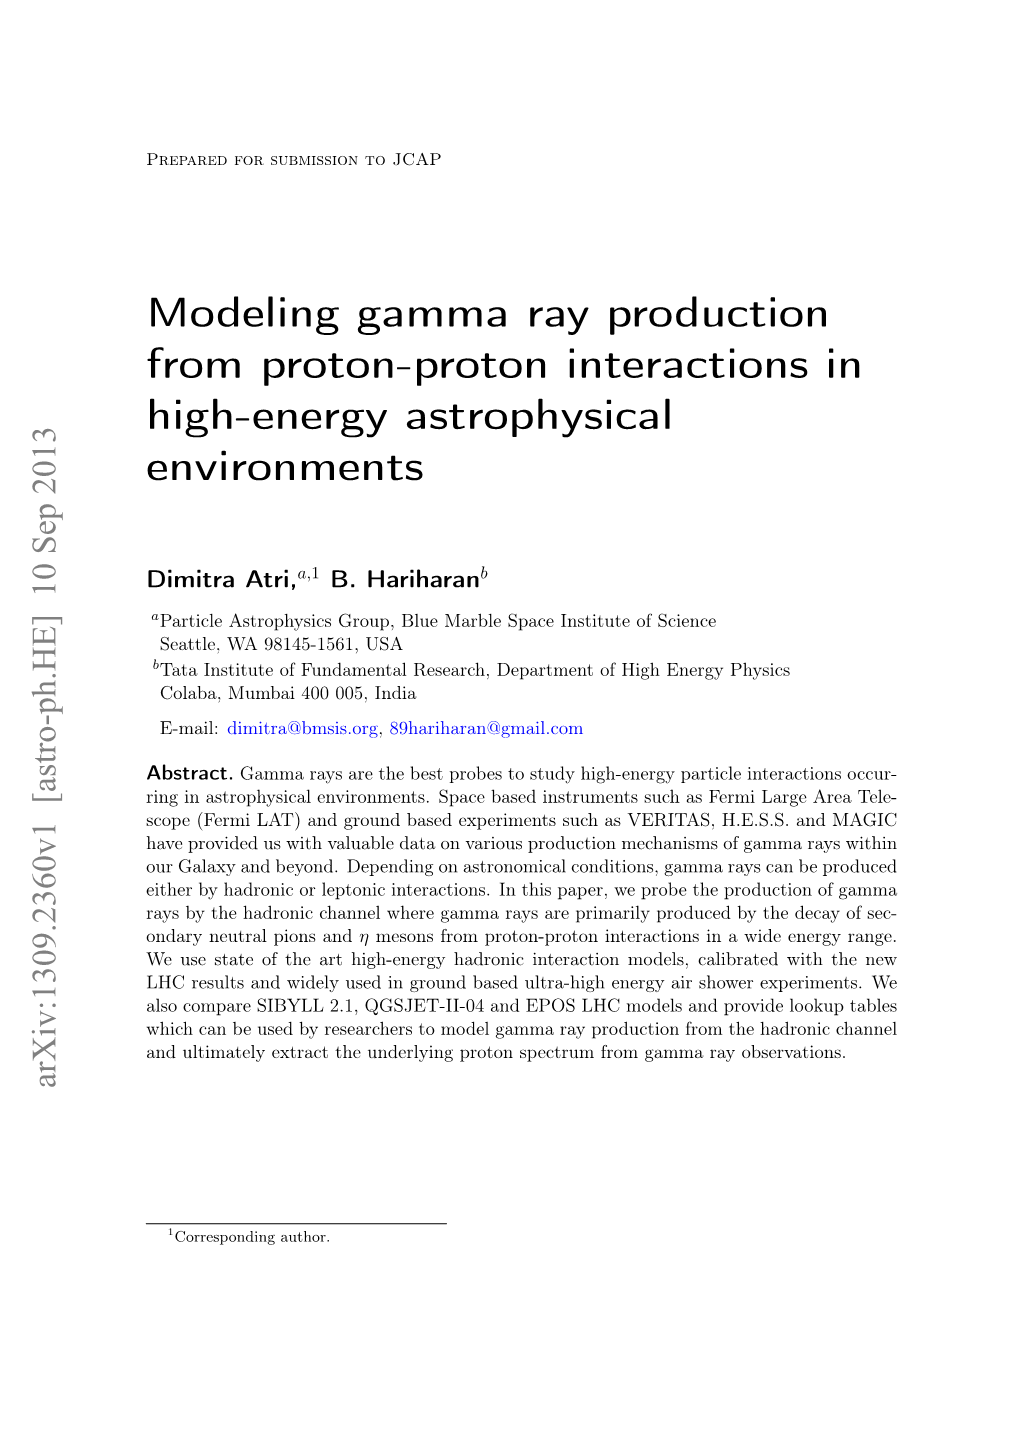 Modeling Gamma Ray Production from Proton-Proton Interactions in High-Energy Astrophysical Environments